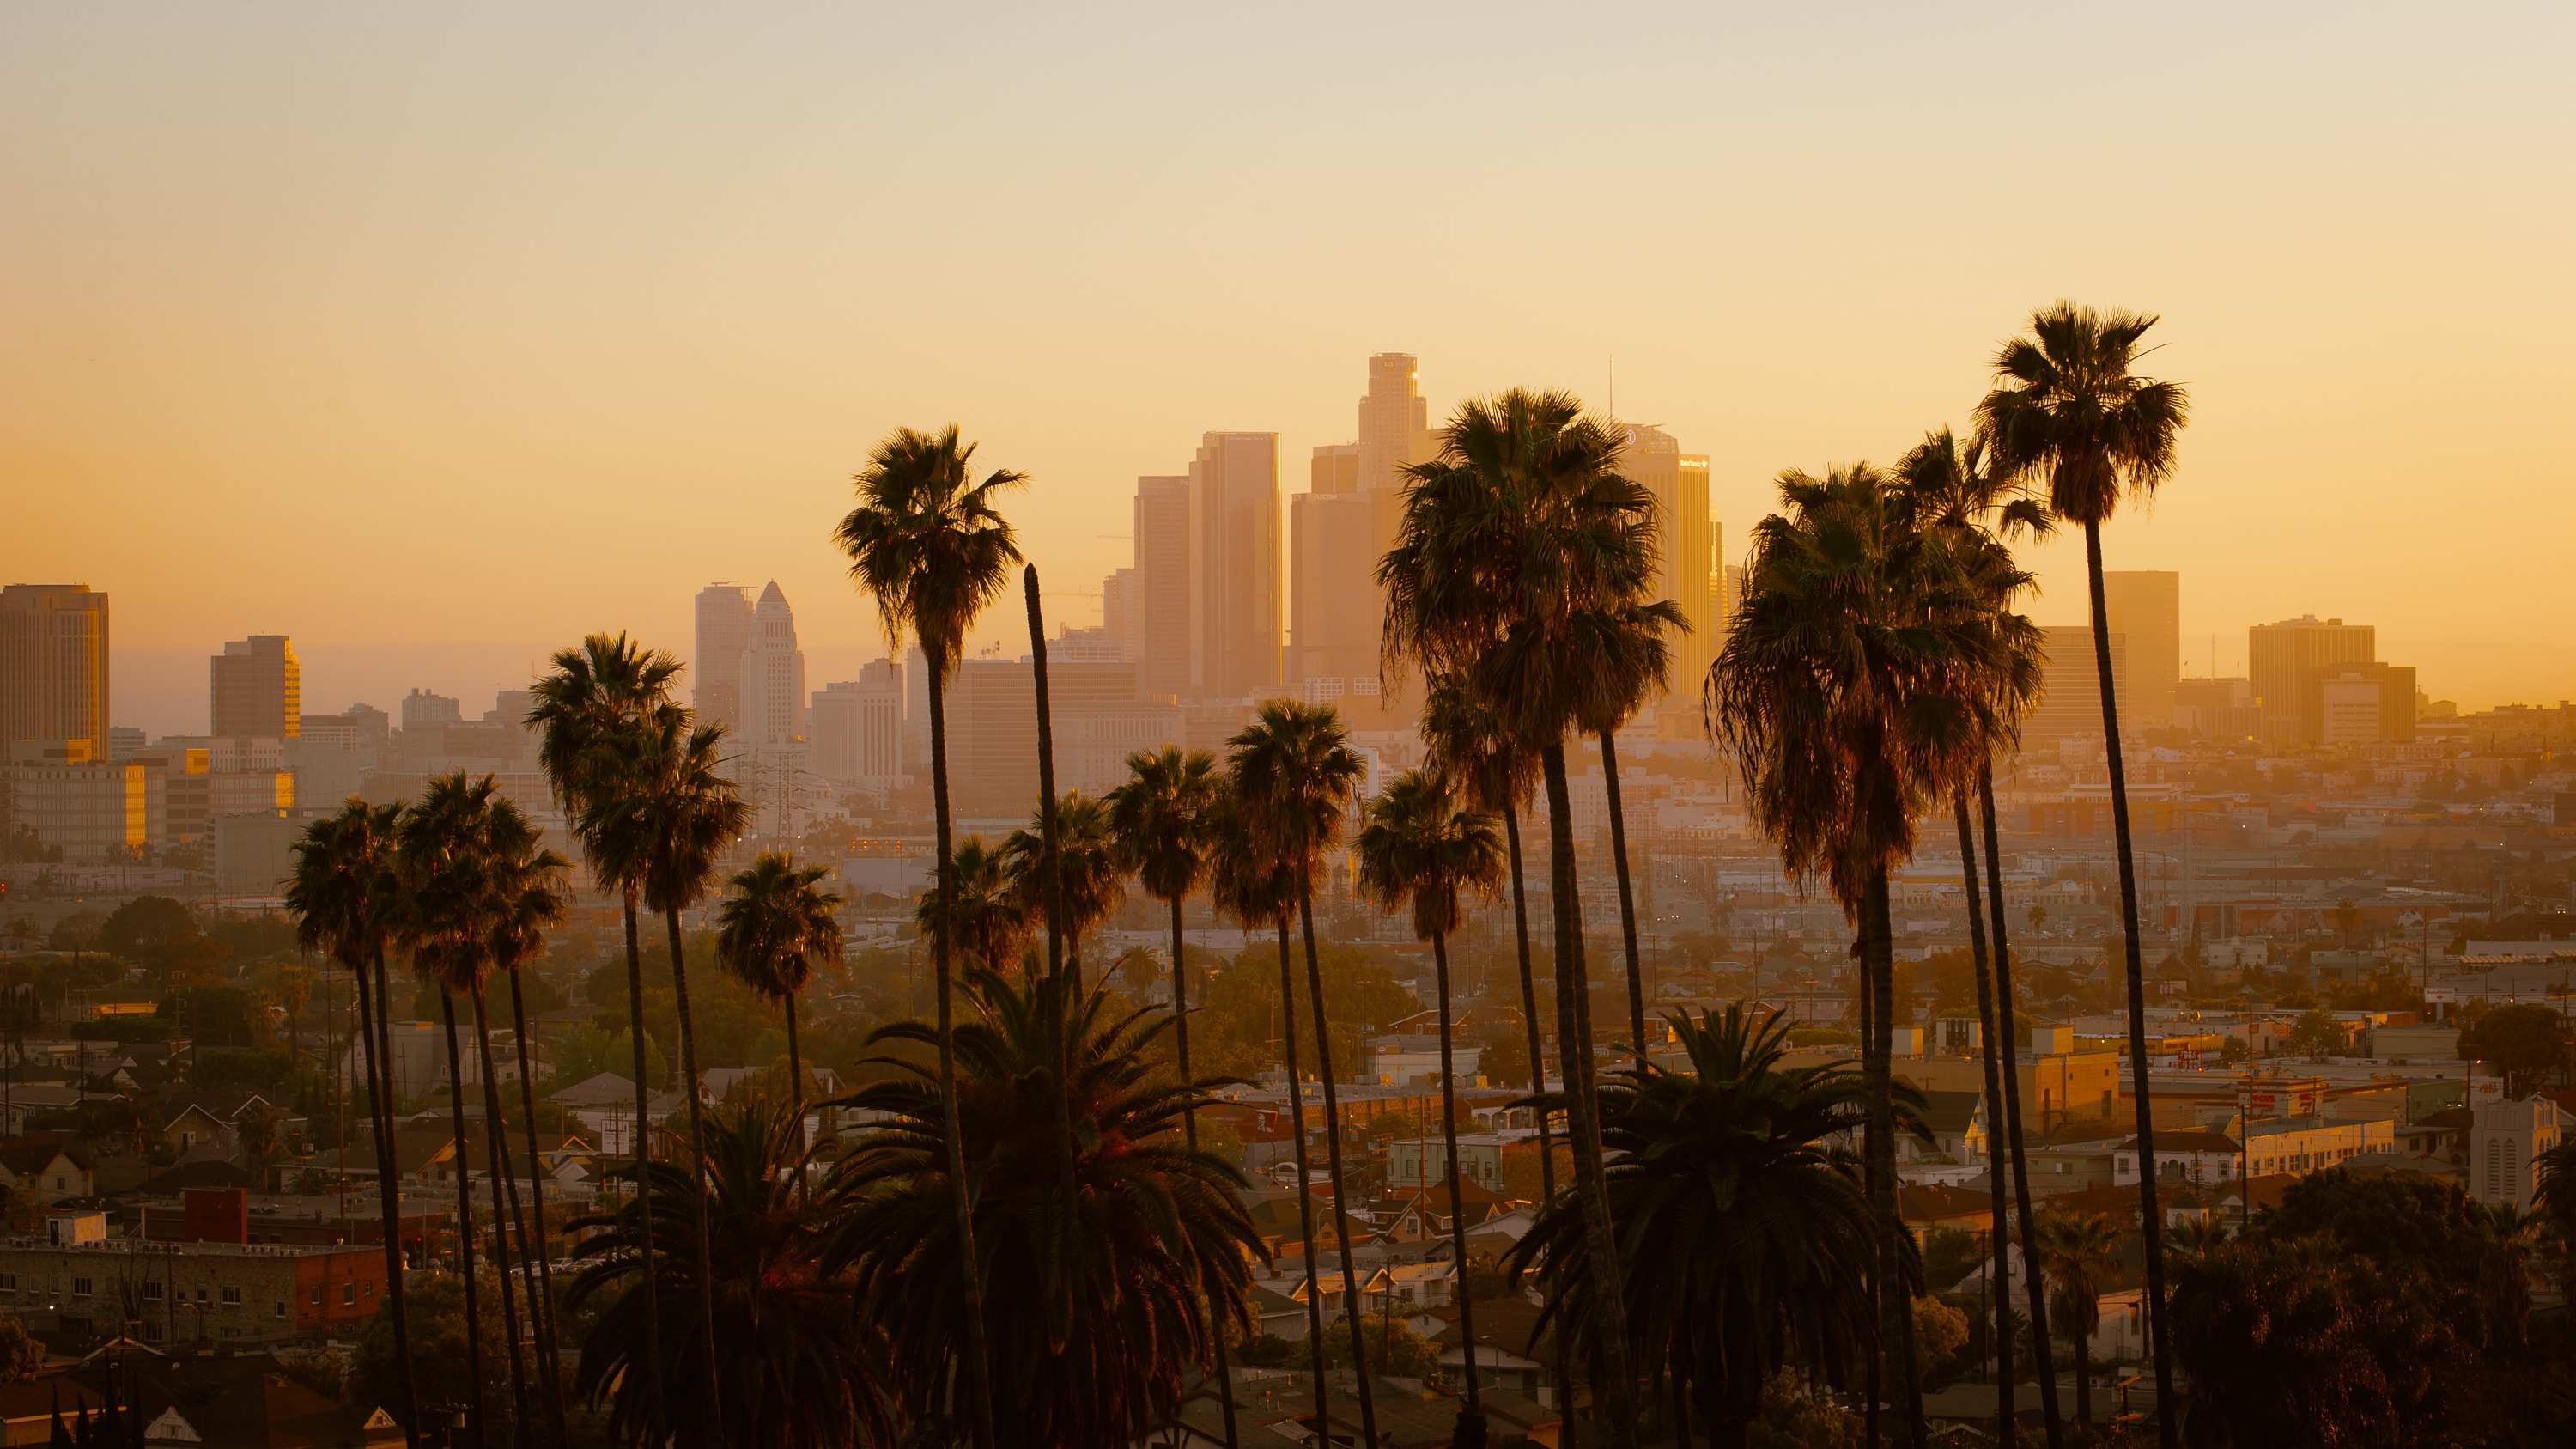 Los Angeles will host the 2028 Olympic and Paralympic Games